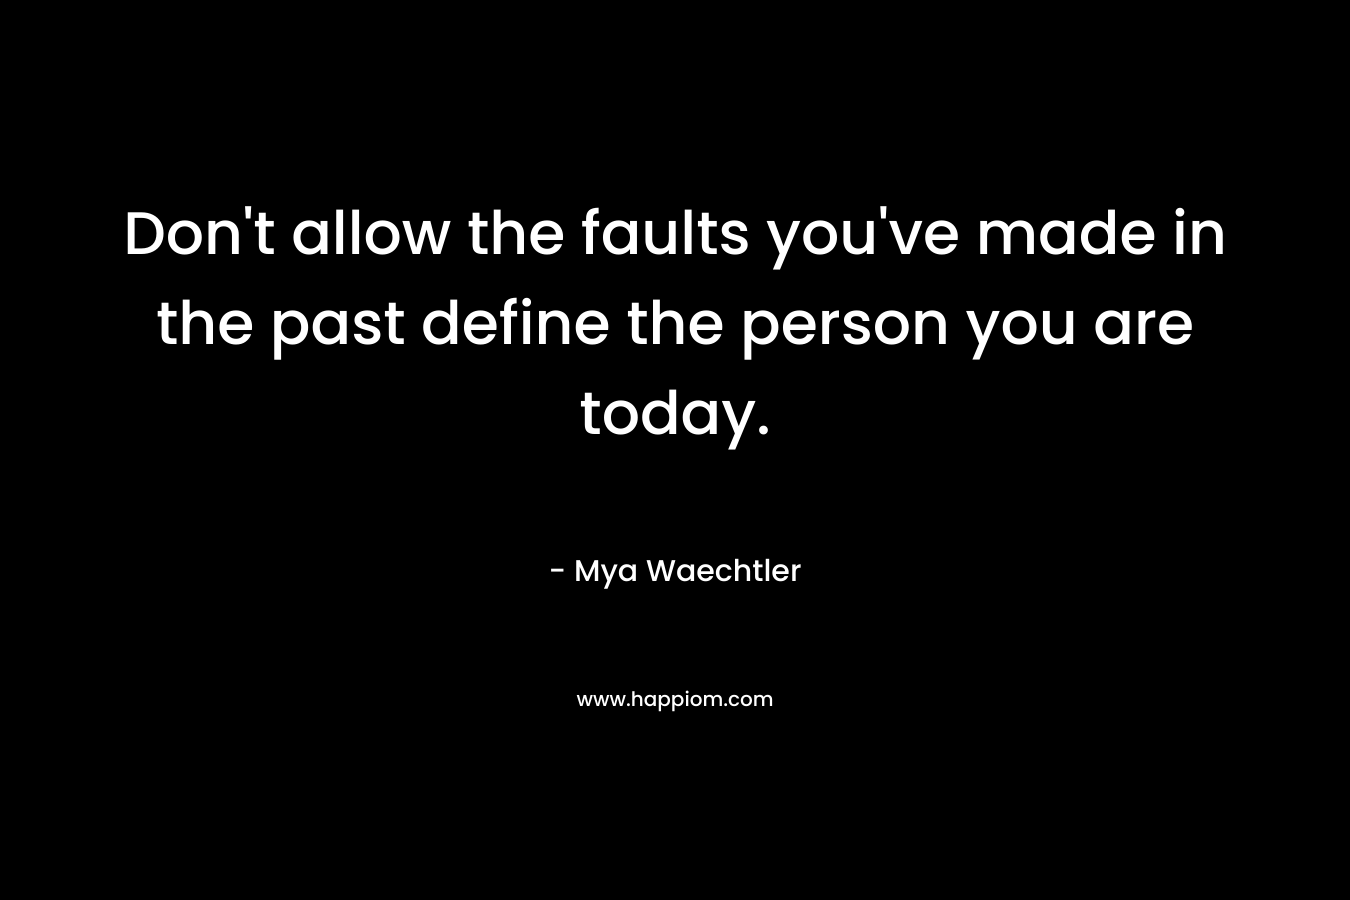 Don’t allow the faults you’ve made in the past define the person you are today. – Mya Waechtler